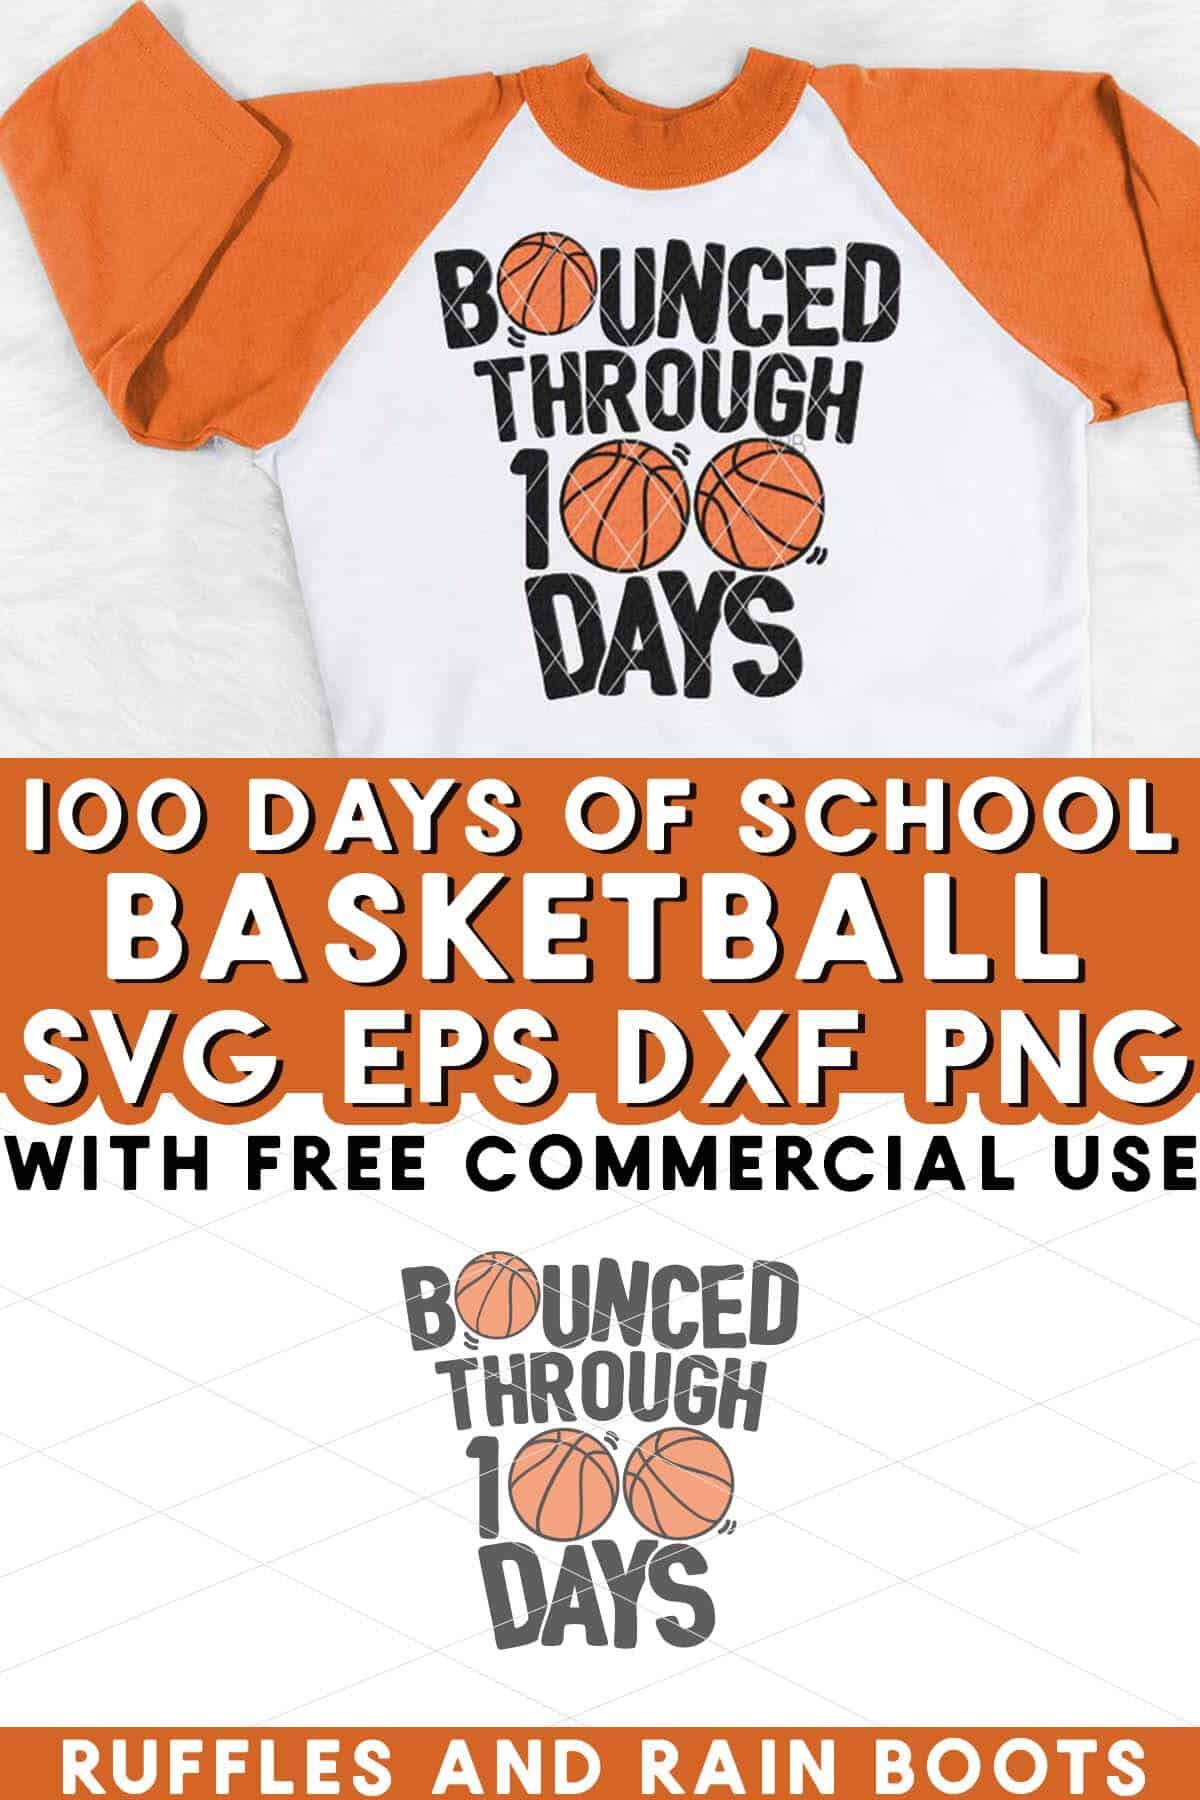 Split vertical image showing an orange sleeve raglan shirt with bounced through 100 days and basketball SVG.